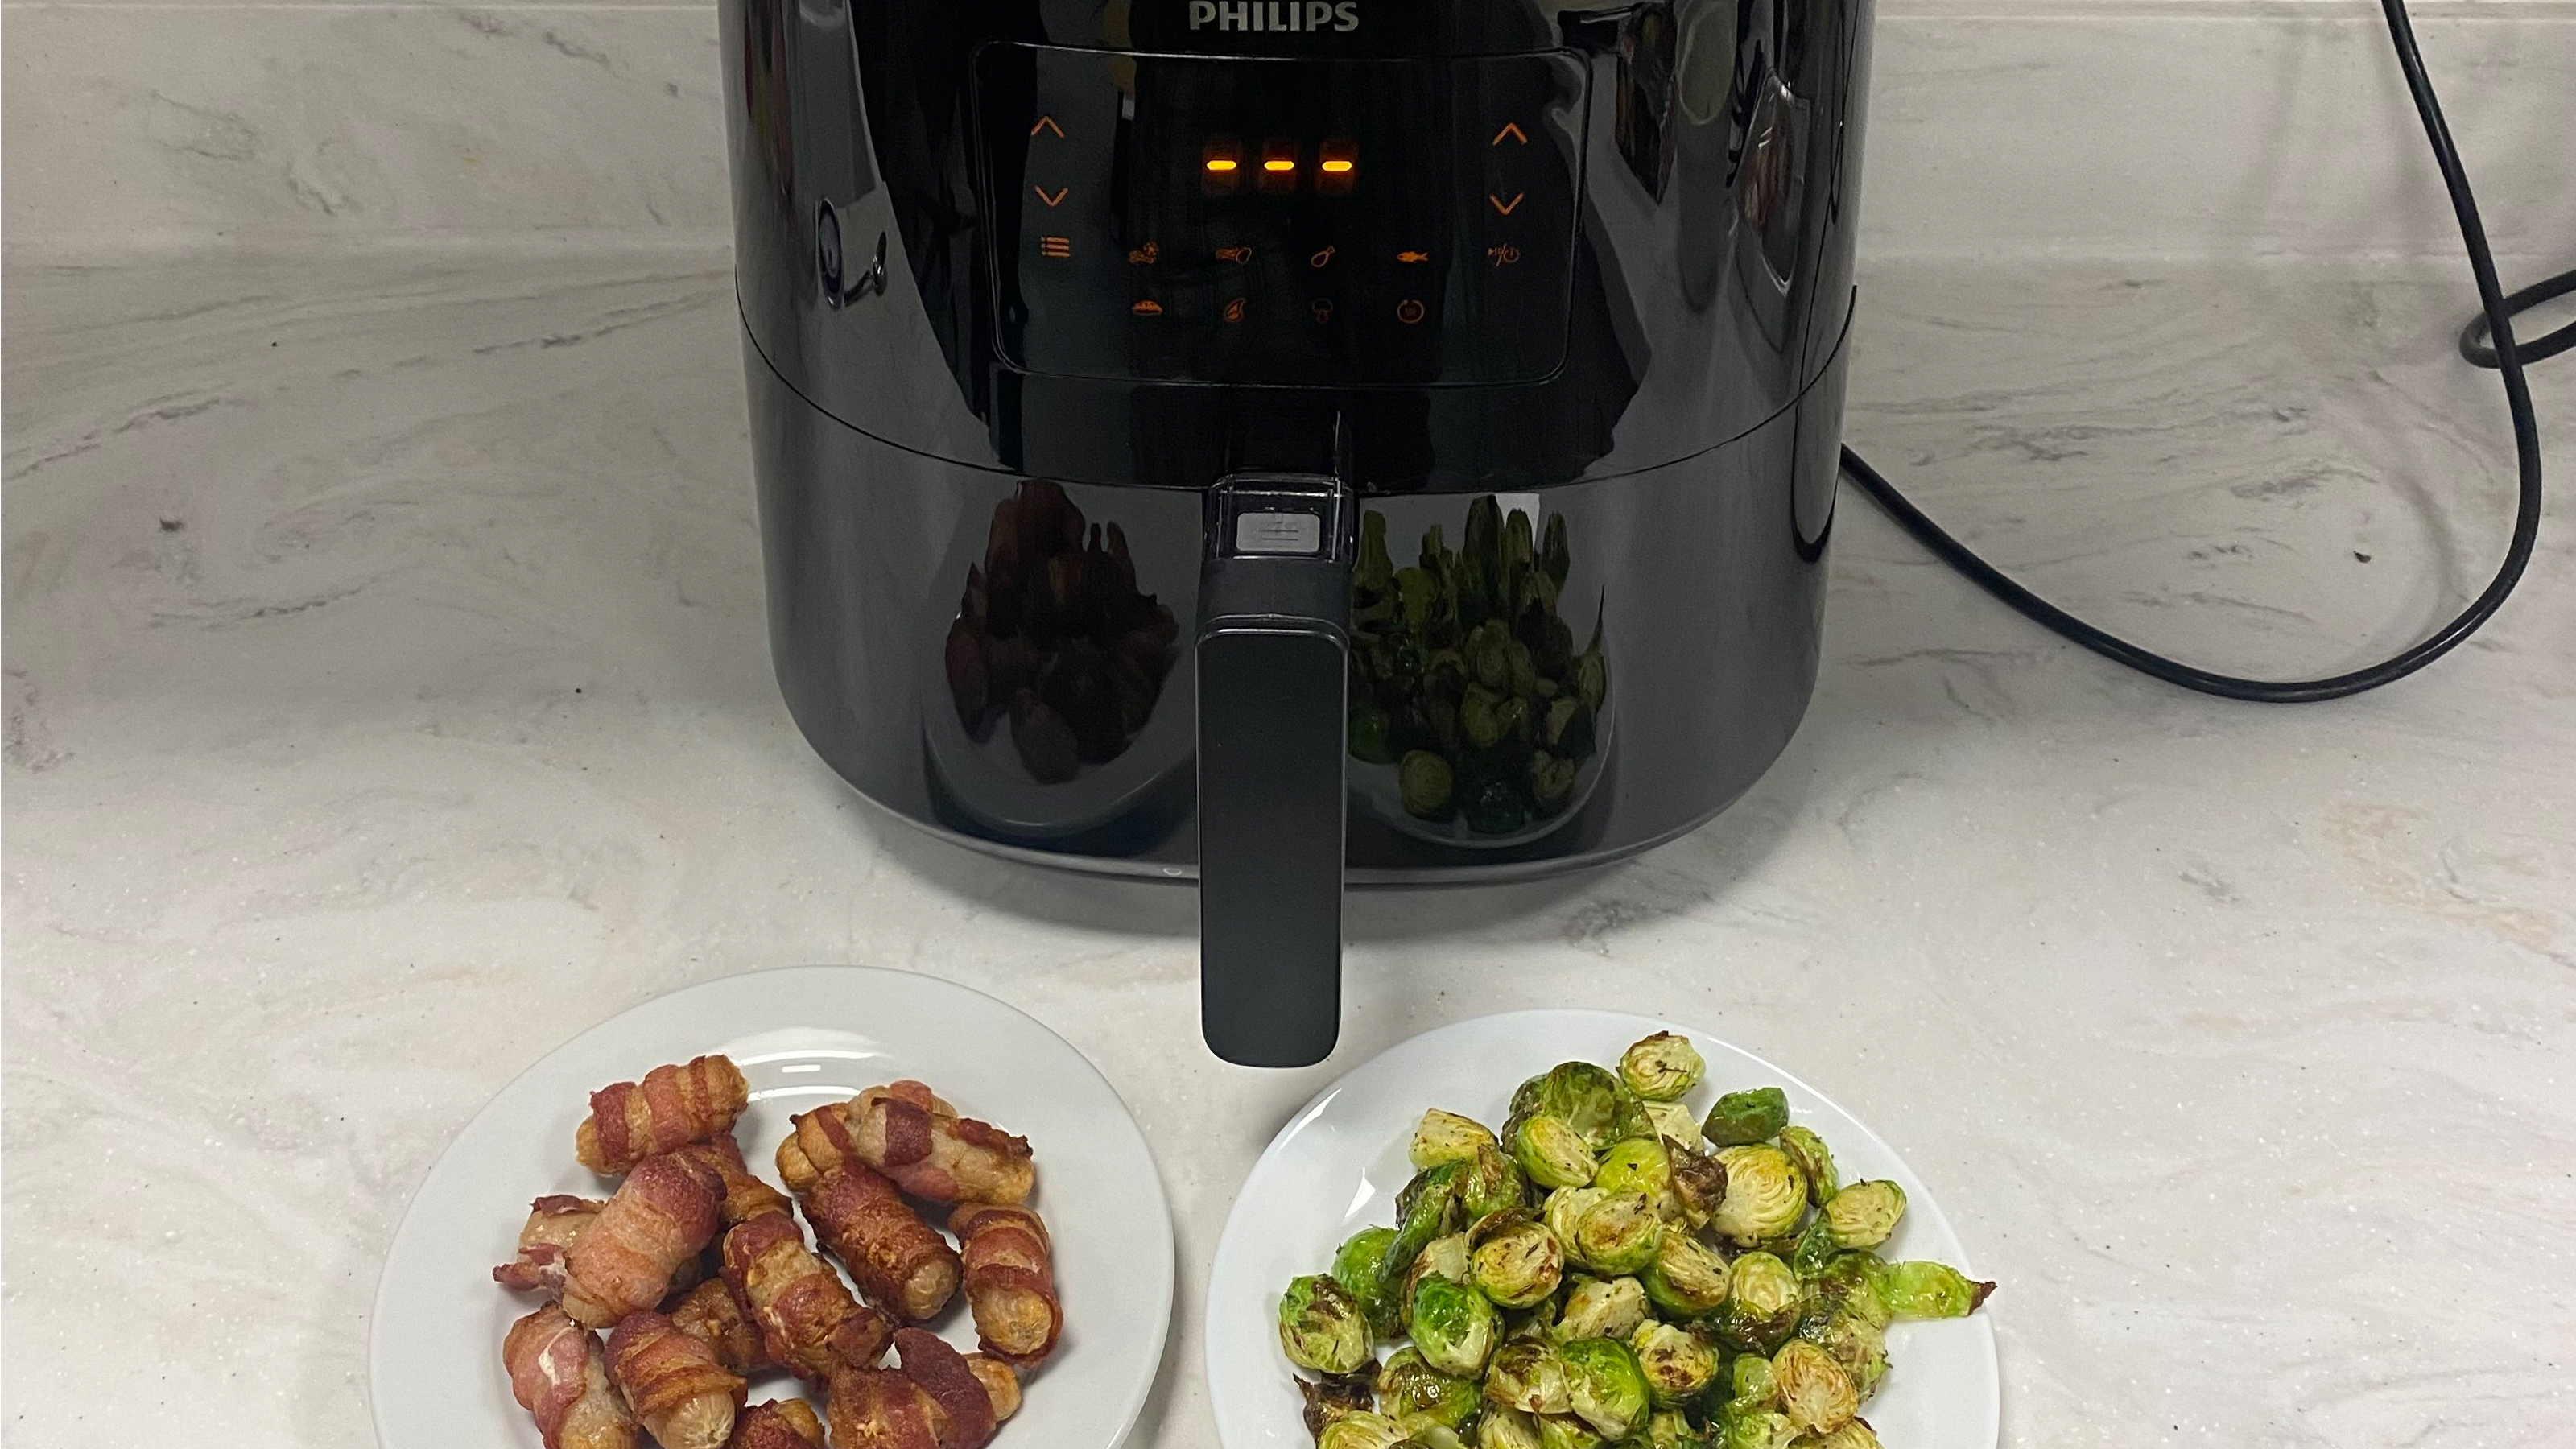 Image of Christmas food cooked in Phillips air fryer